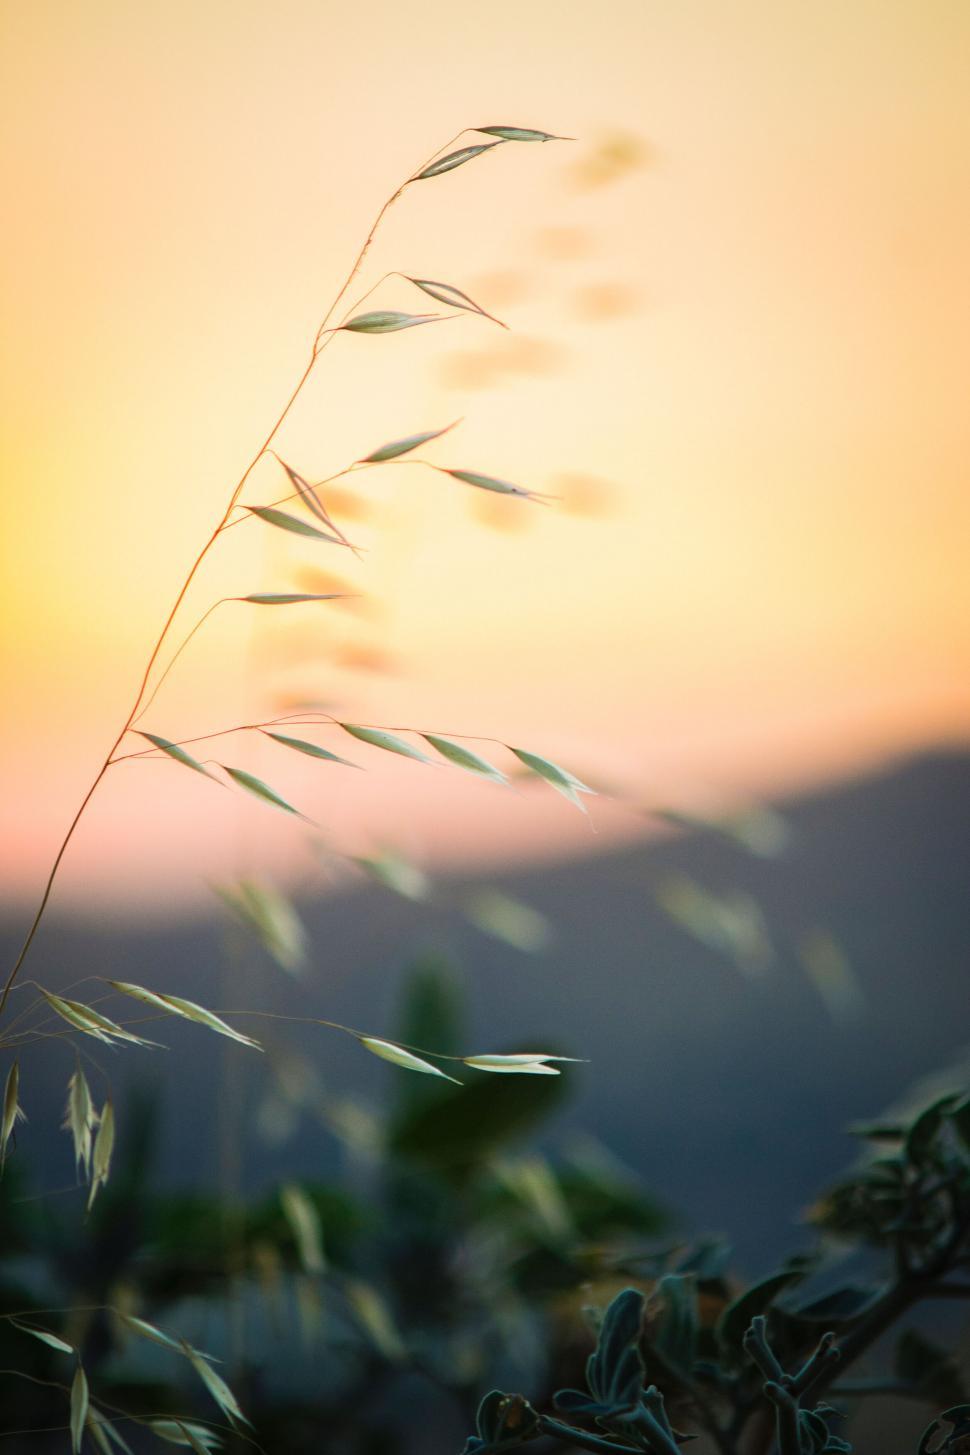 Free Image of Delicate grass against a soft sunset sky 